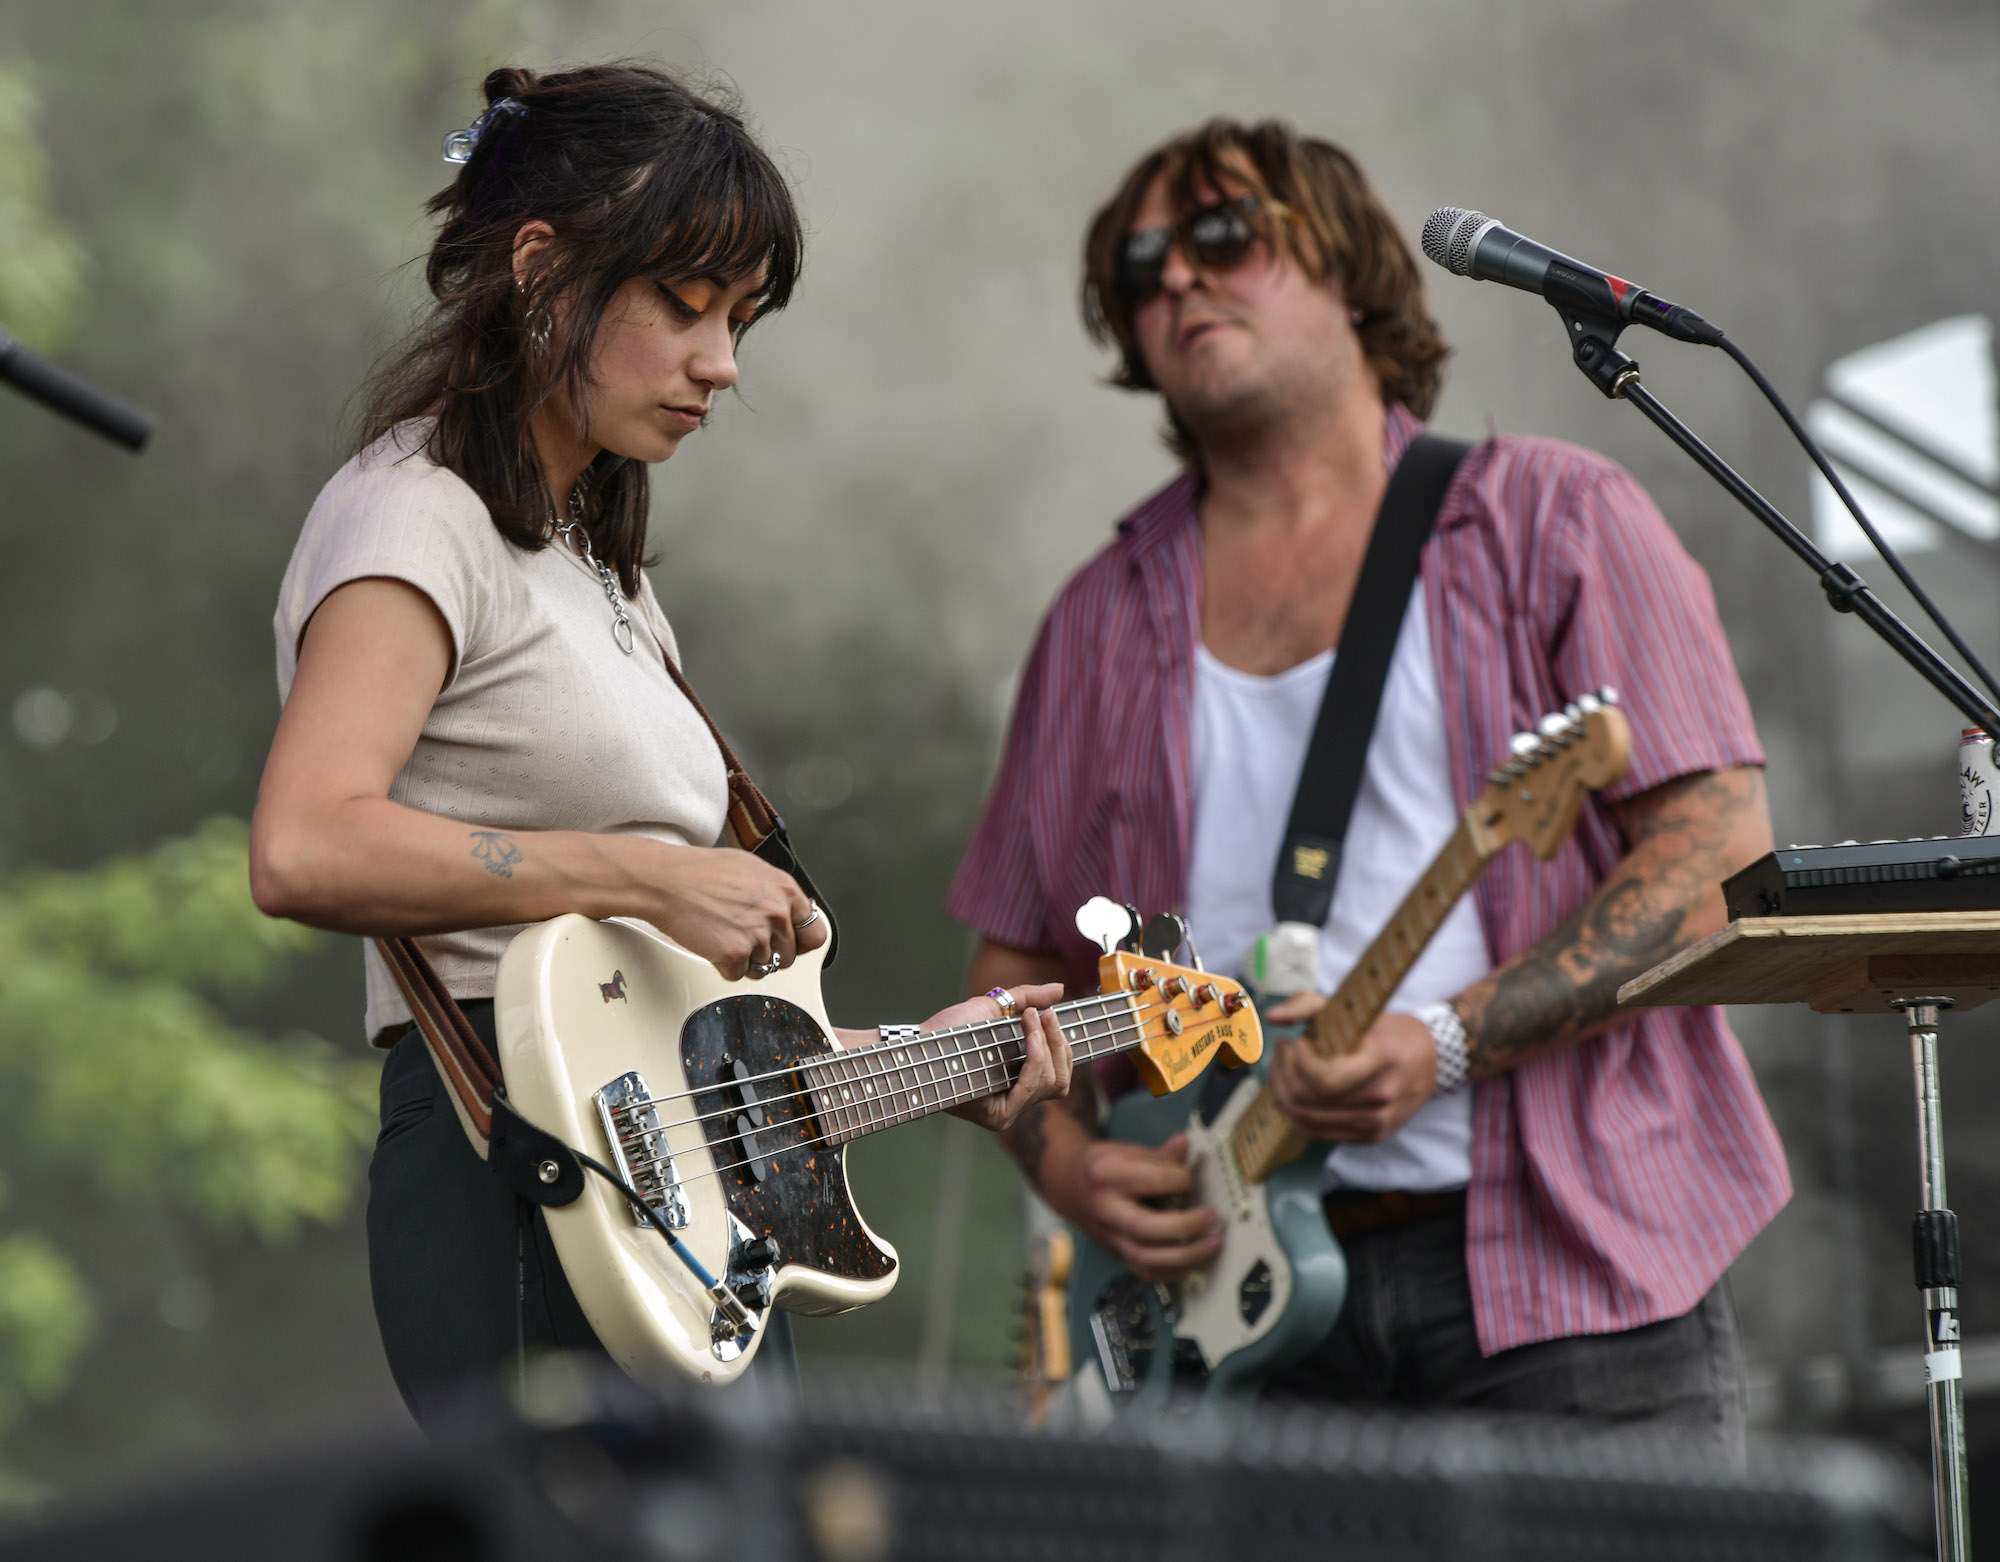 Spirit Of The Beehive Live At Pitchfork [GALLERY] 7